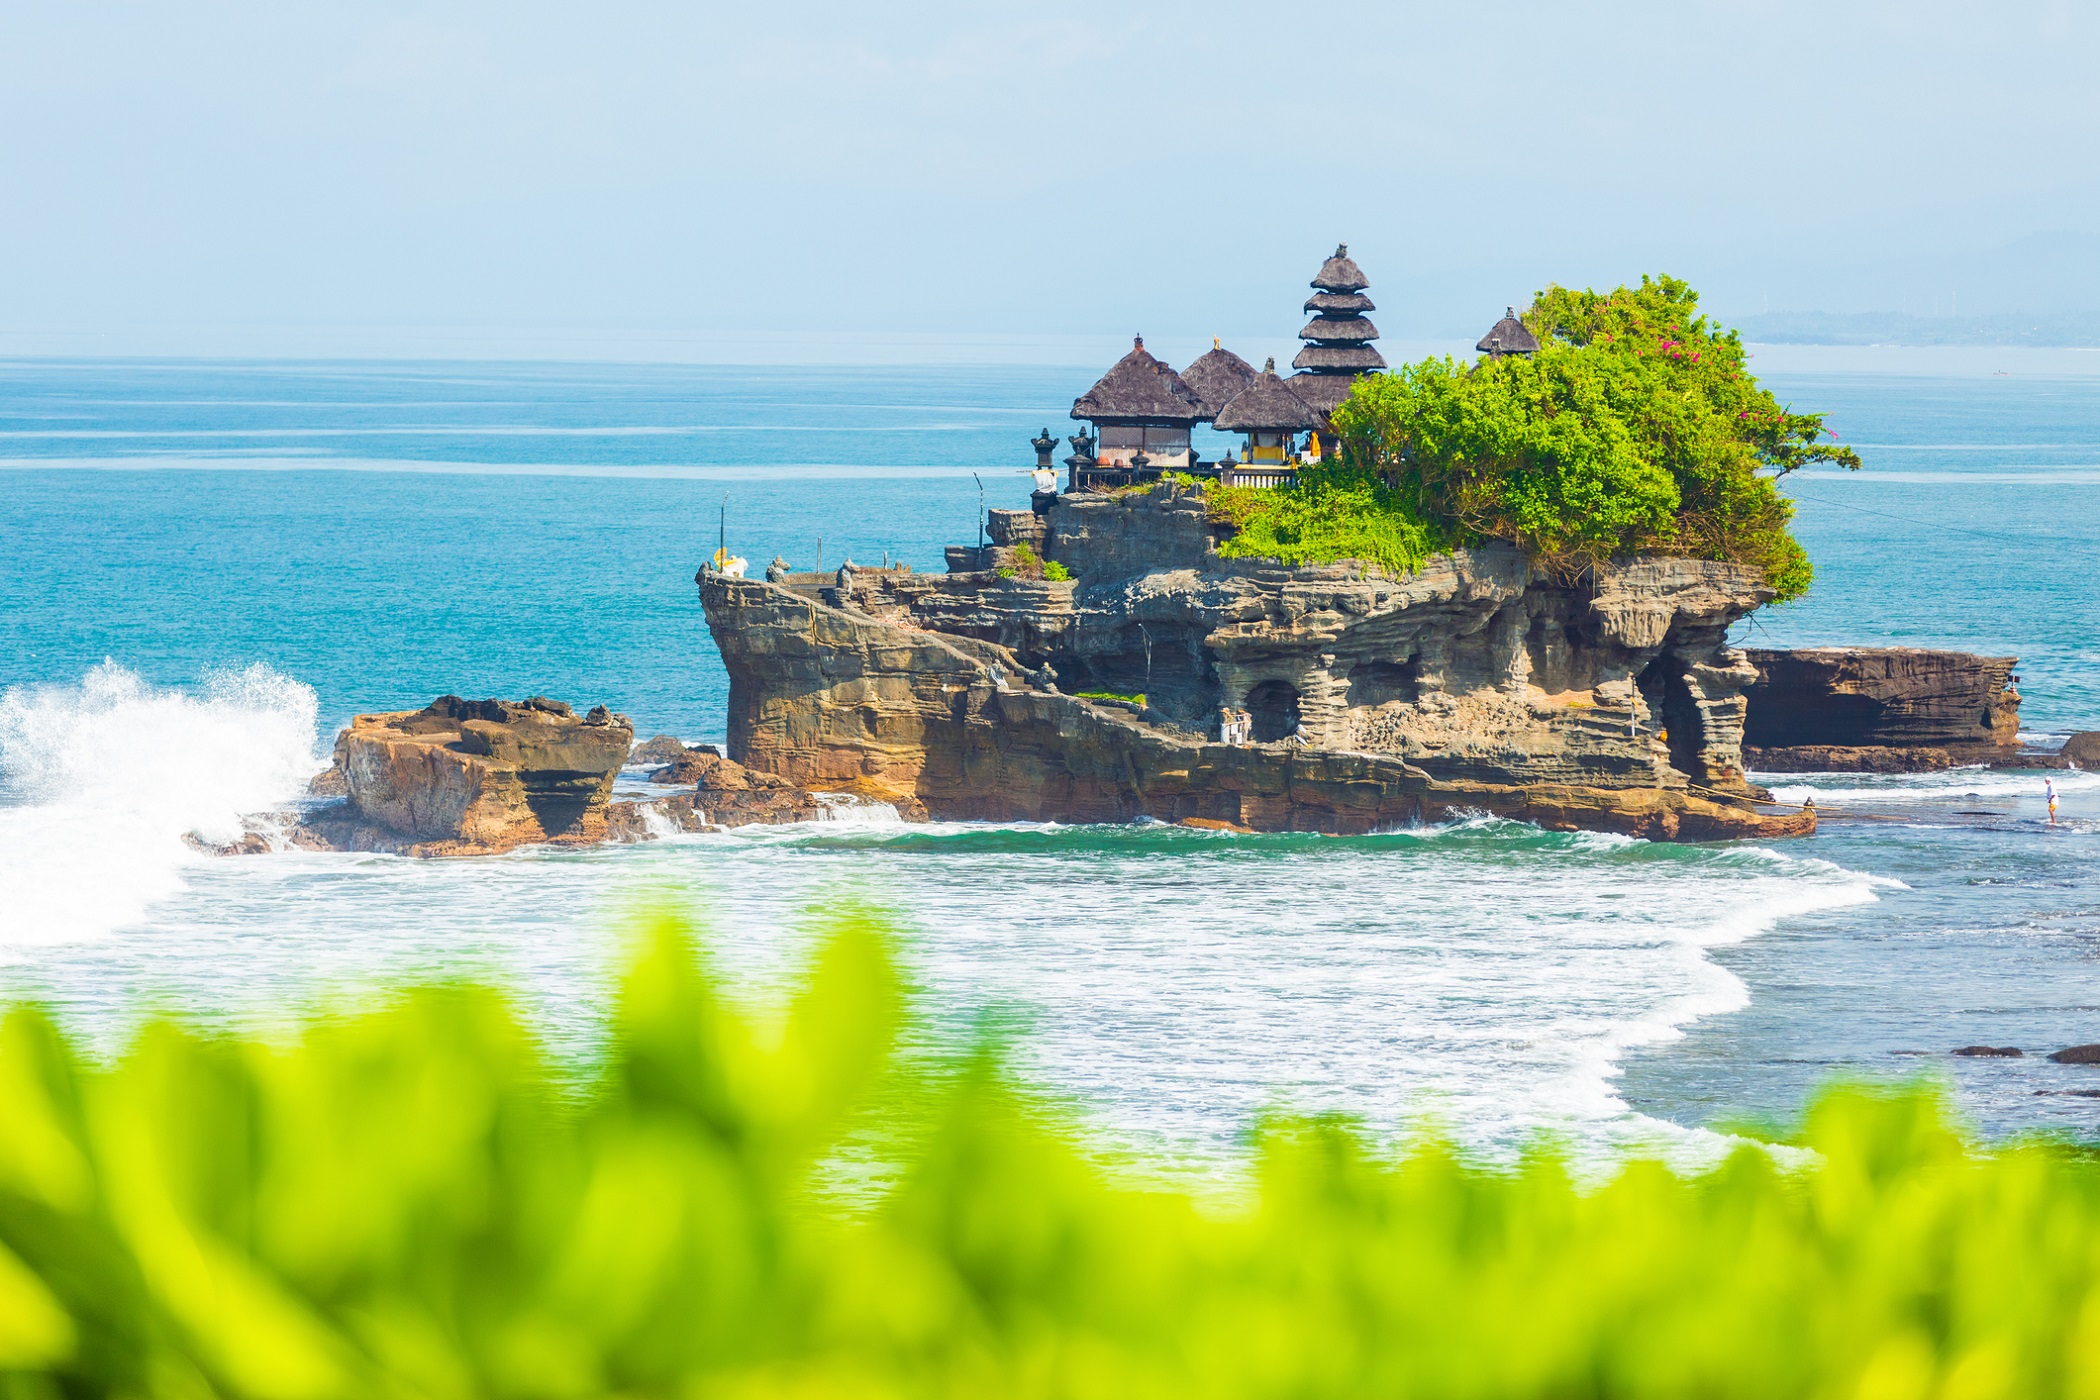 Tanah Lot - Temple in the Ocean